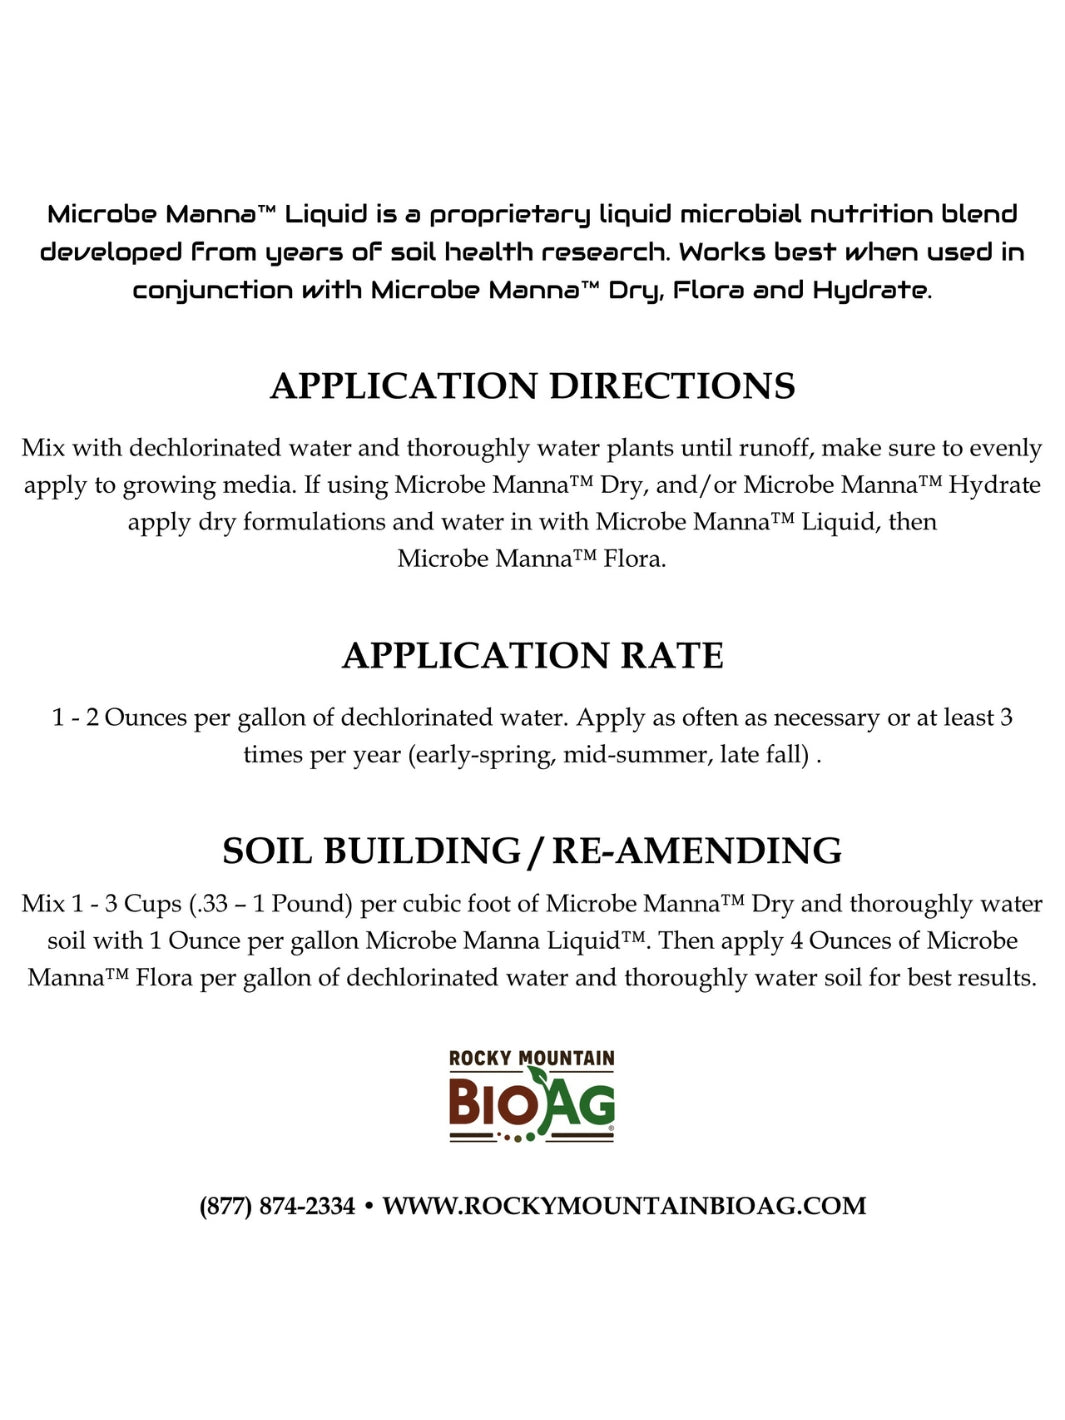 Microbe Manna Liquid super food for soil microbes Application Directions and Rates